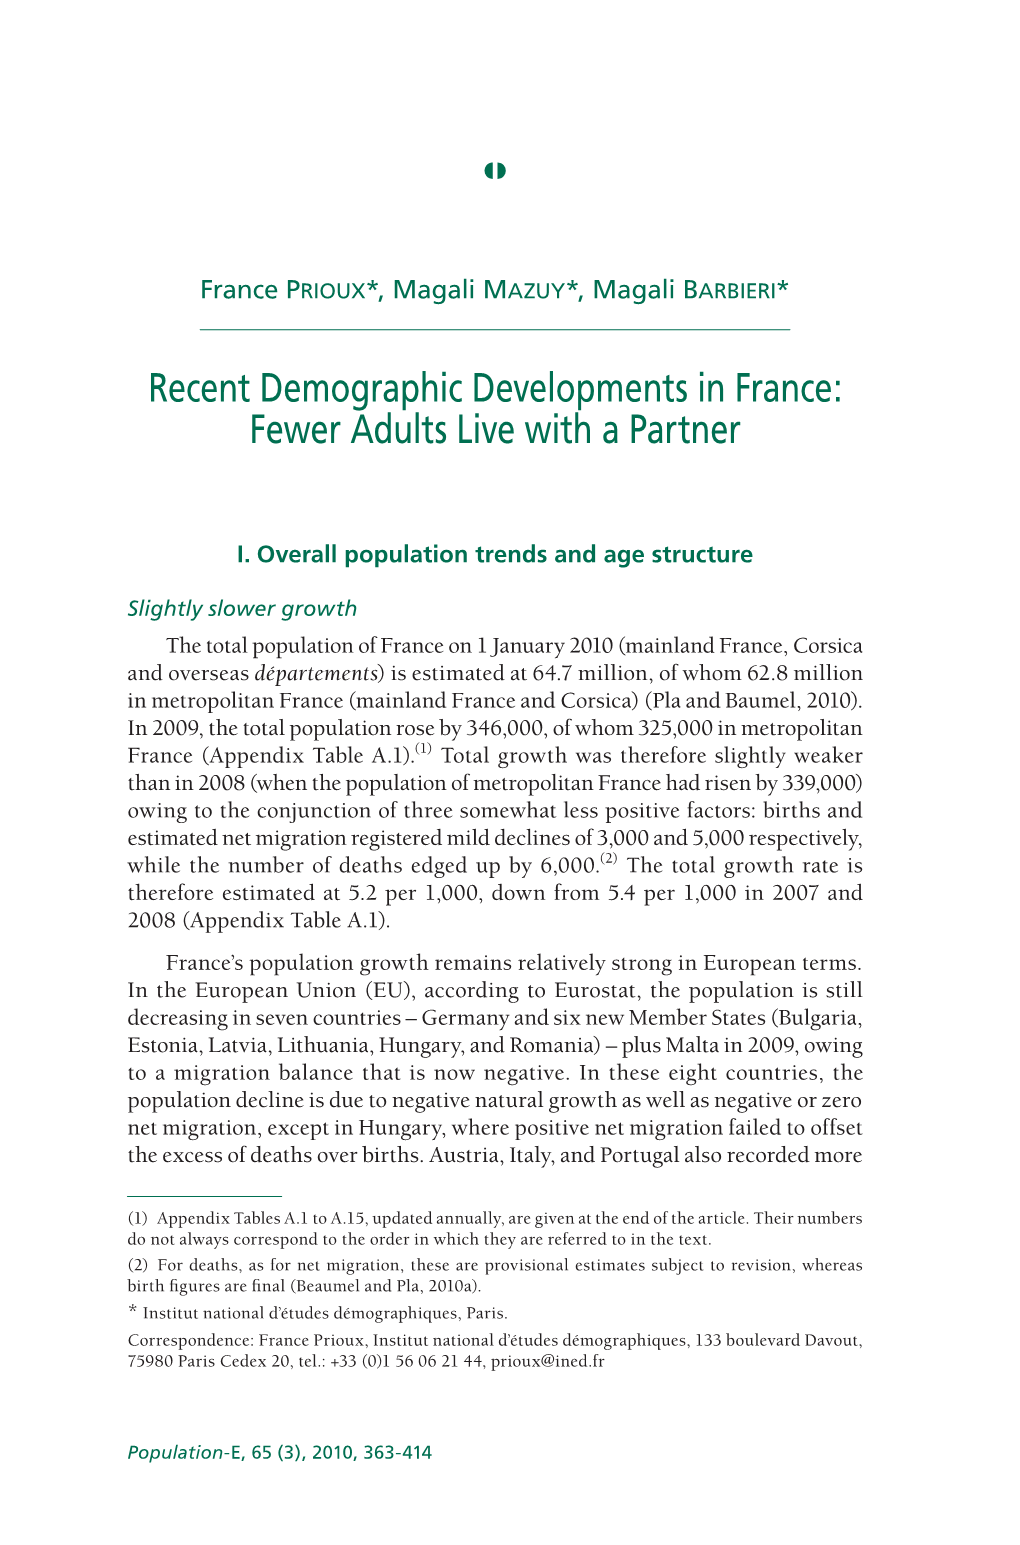 Recent Demographic Developments in France: Fewer Adults Live with a Partner